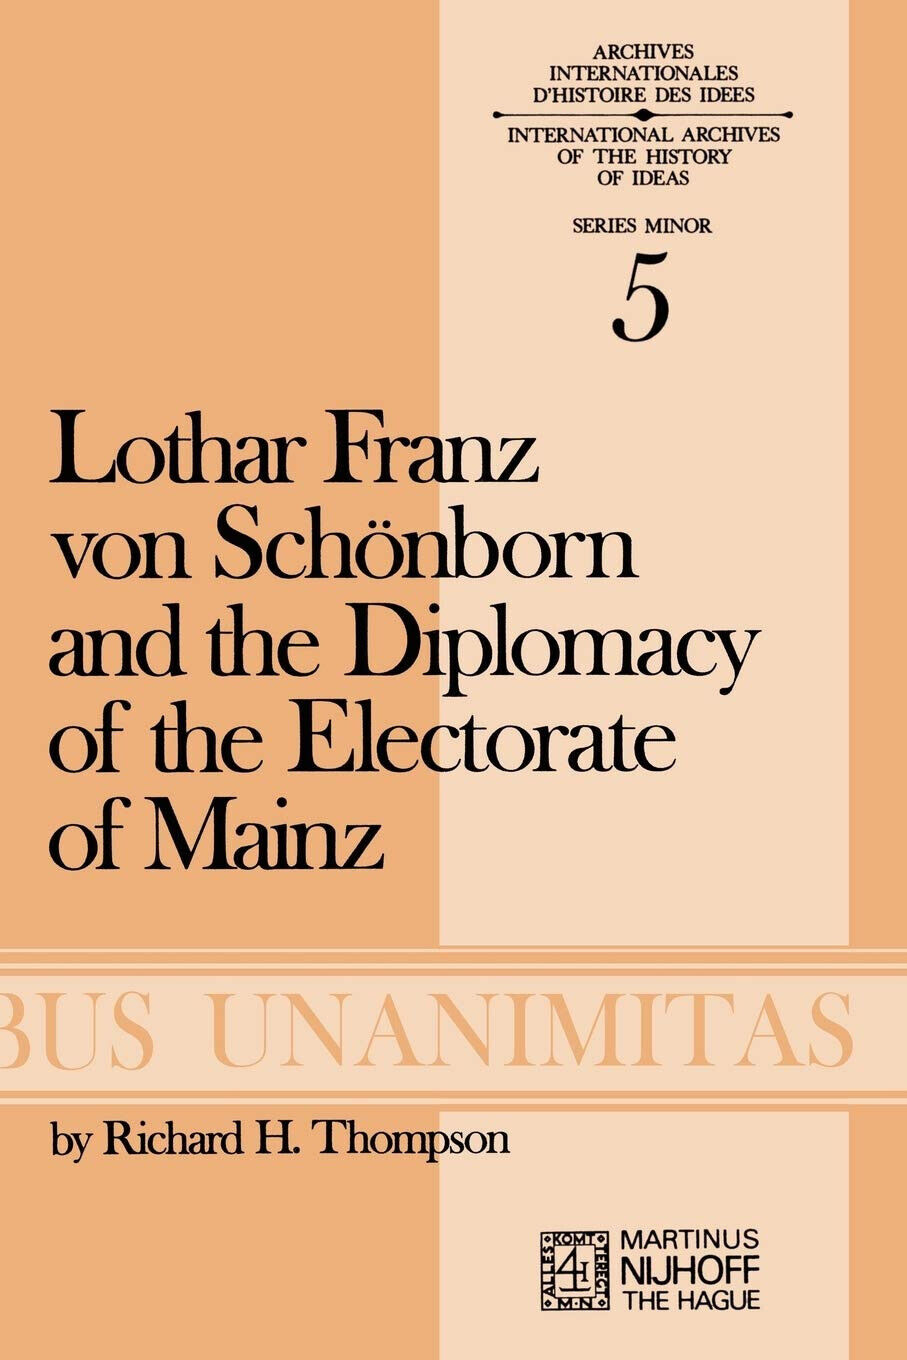 Lothar Franz von Sch?nborn and the Diplomacy of the Electorate of Mainz - 1973